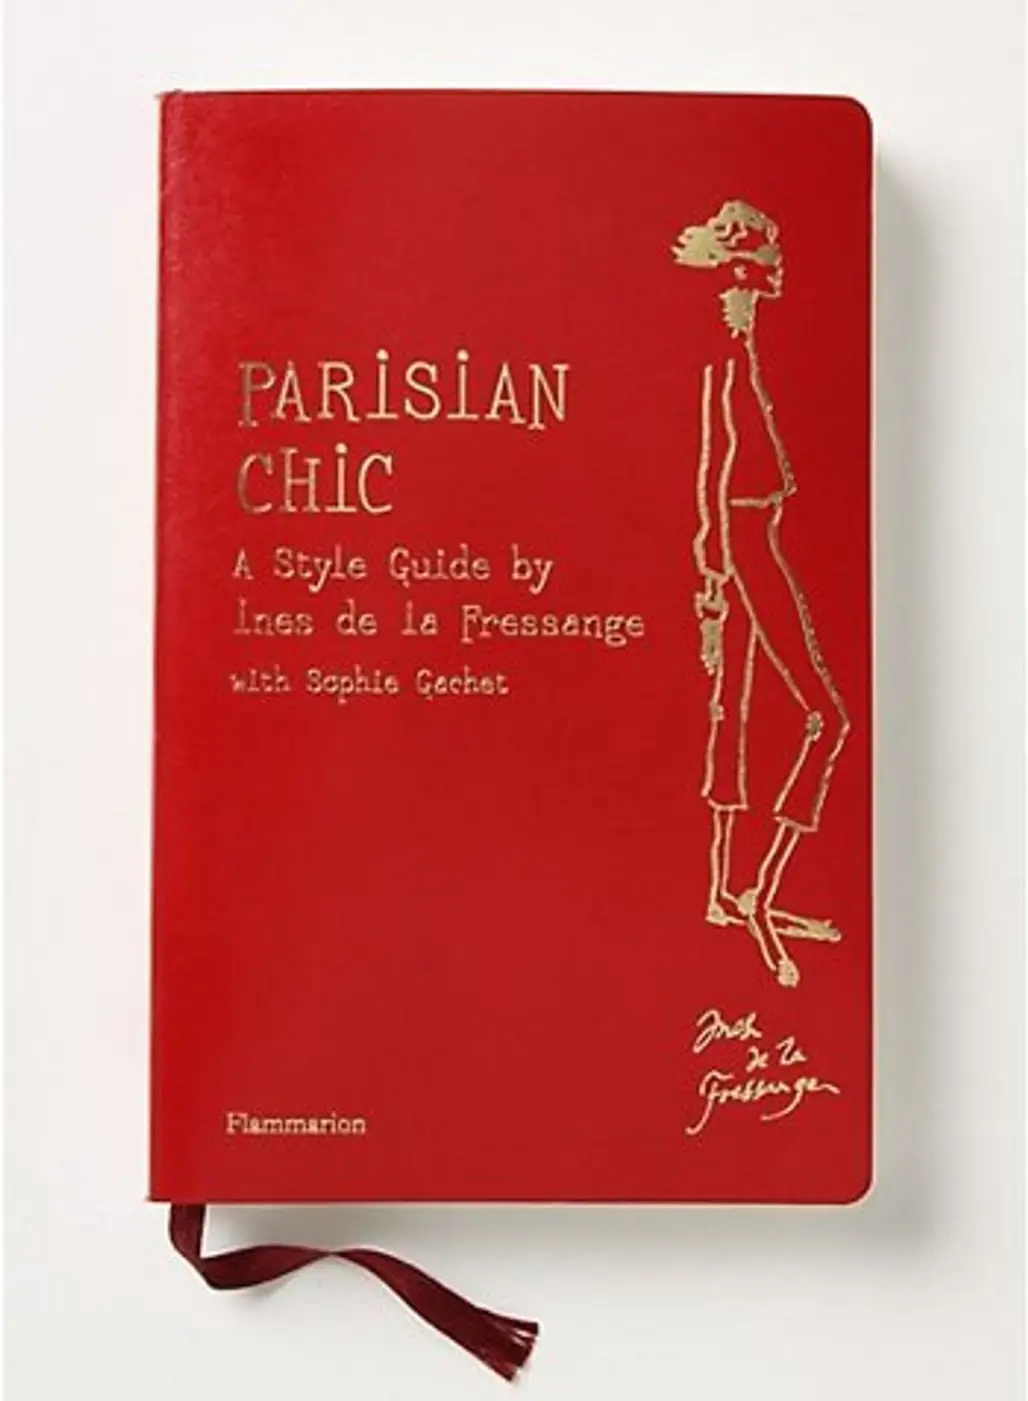 Parisian Chic: a Style Guide